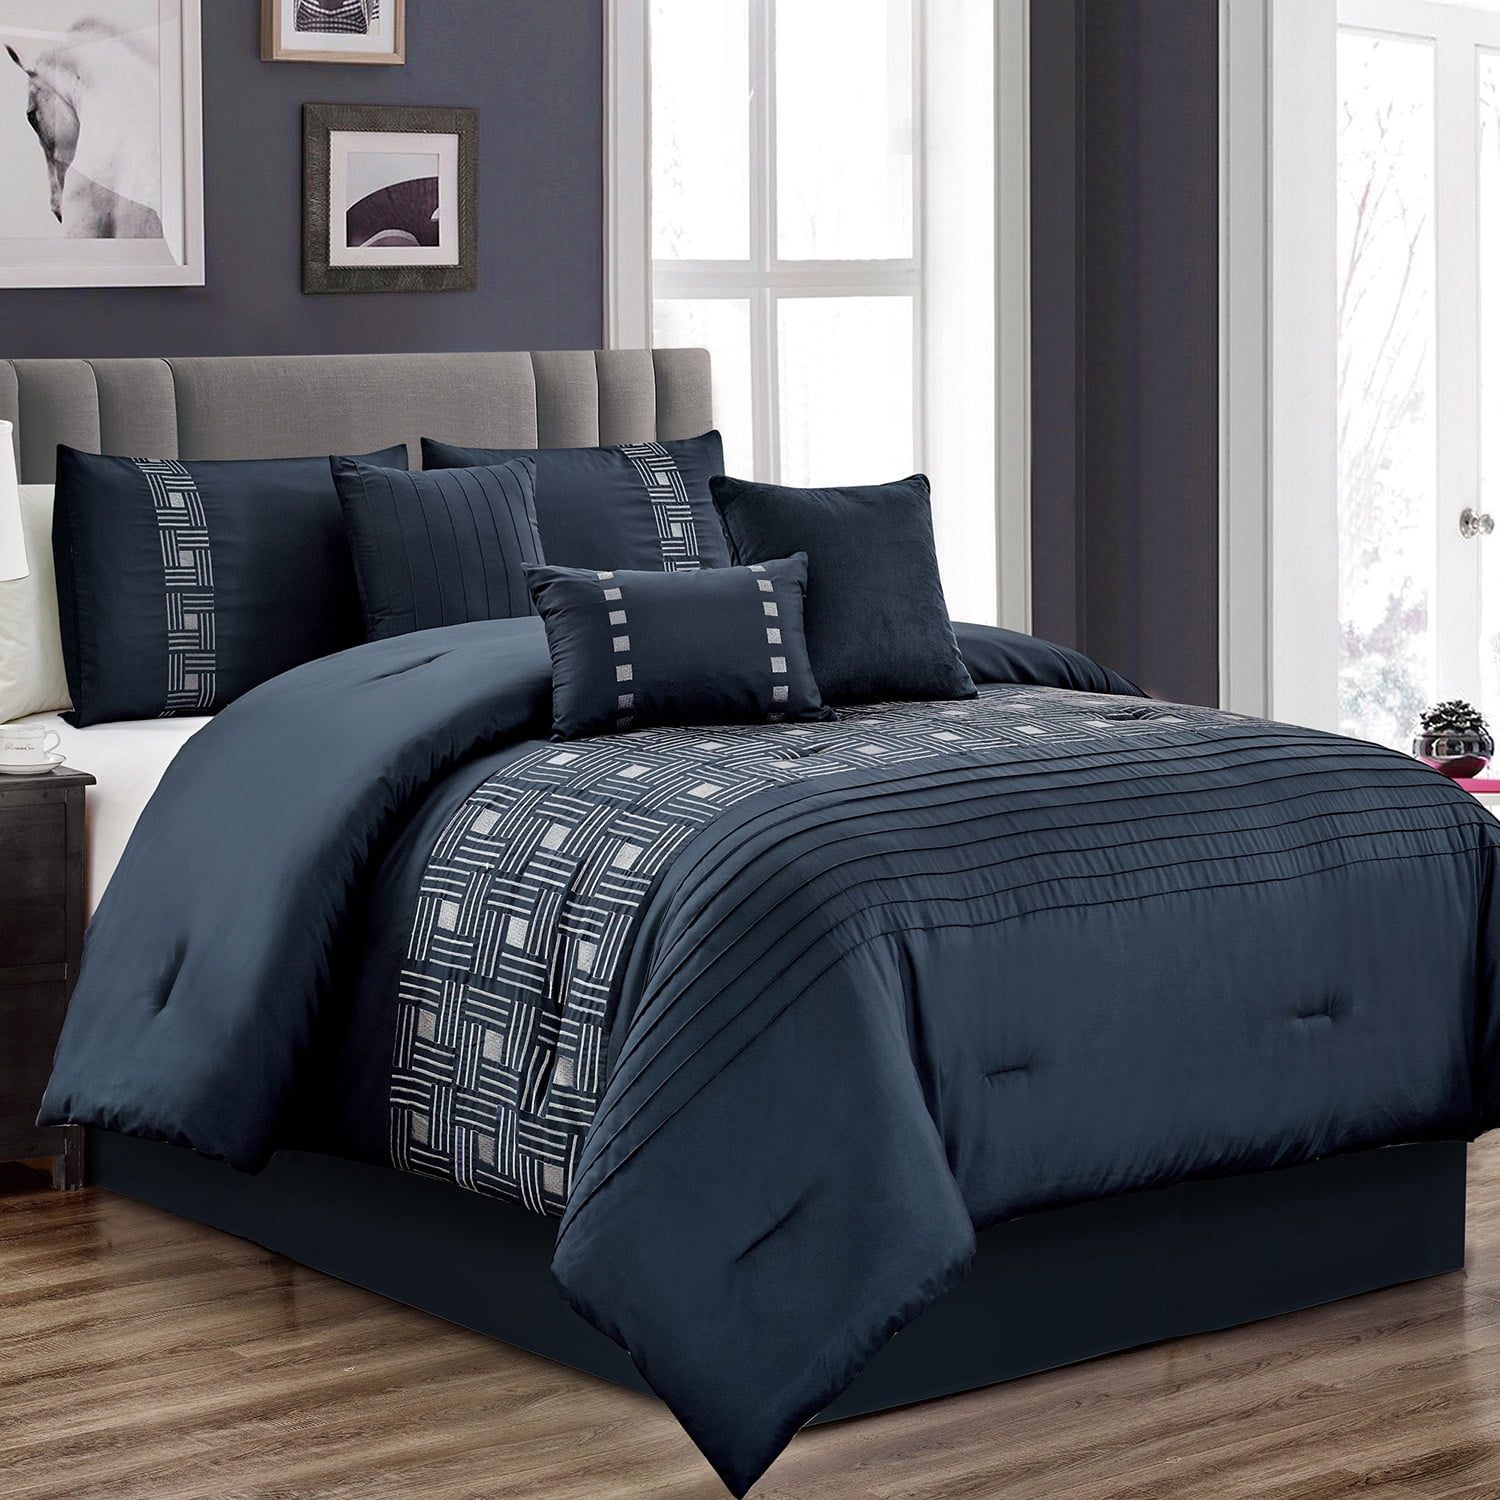 7 Pieces Luxury Embroidery Pattern Microfiber Comforter Set Navy Blue King Size 